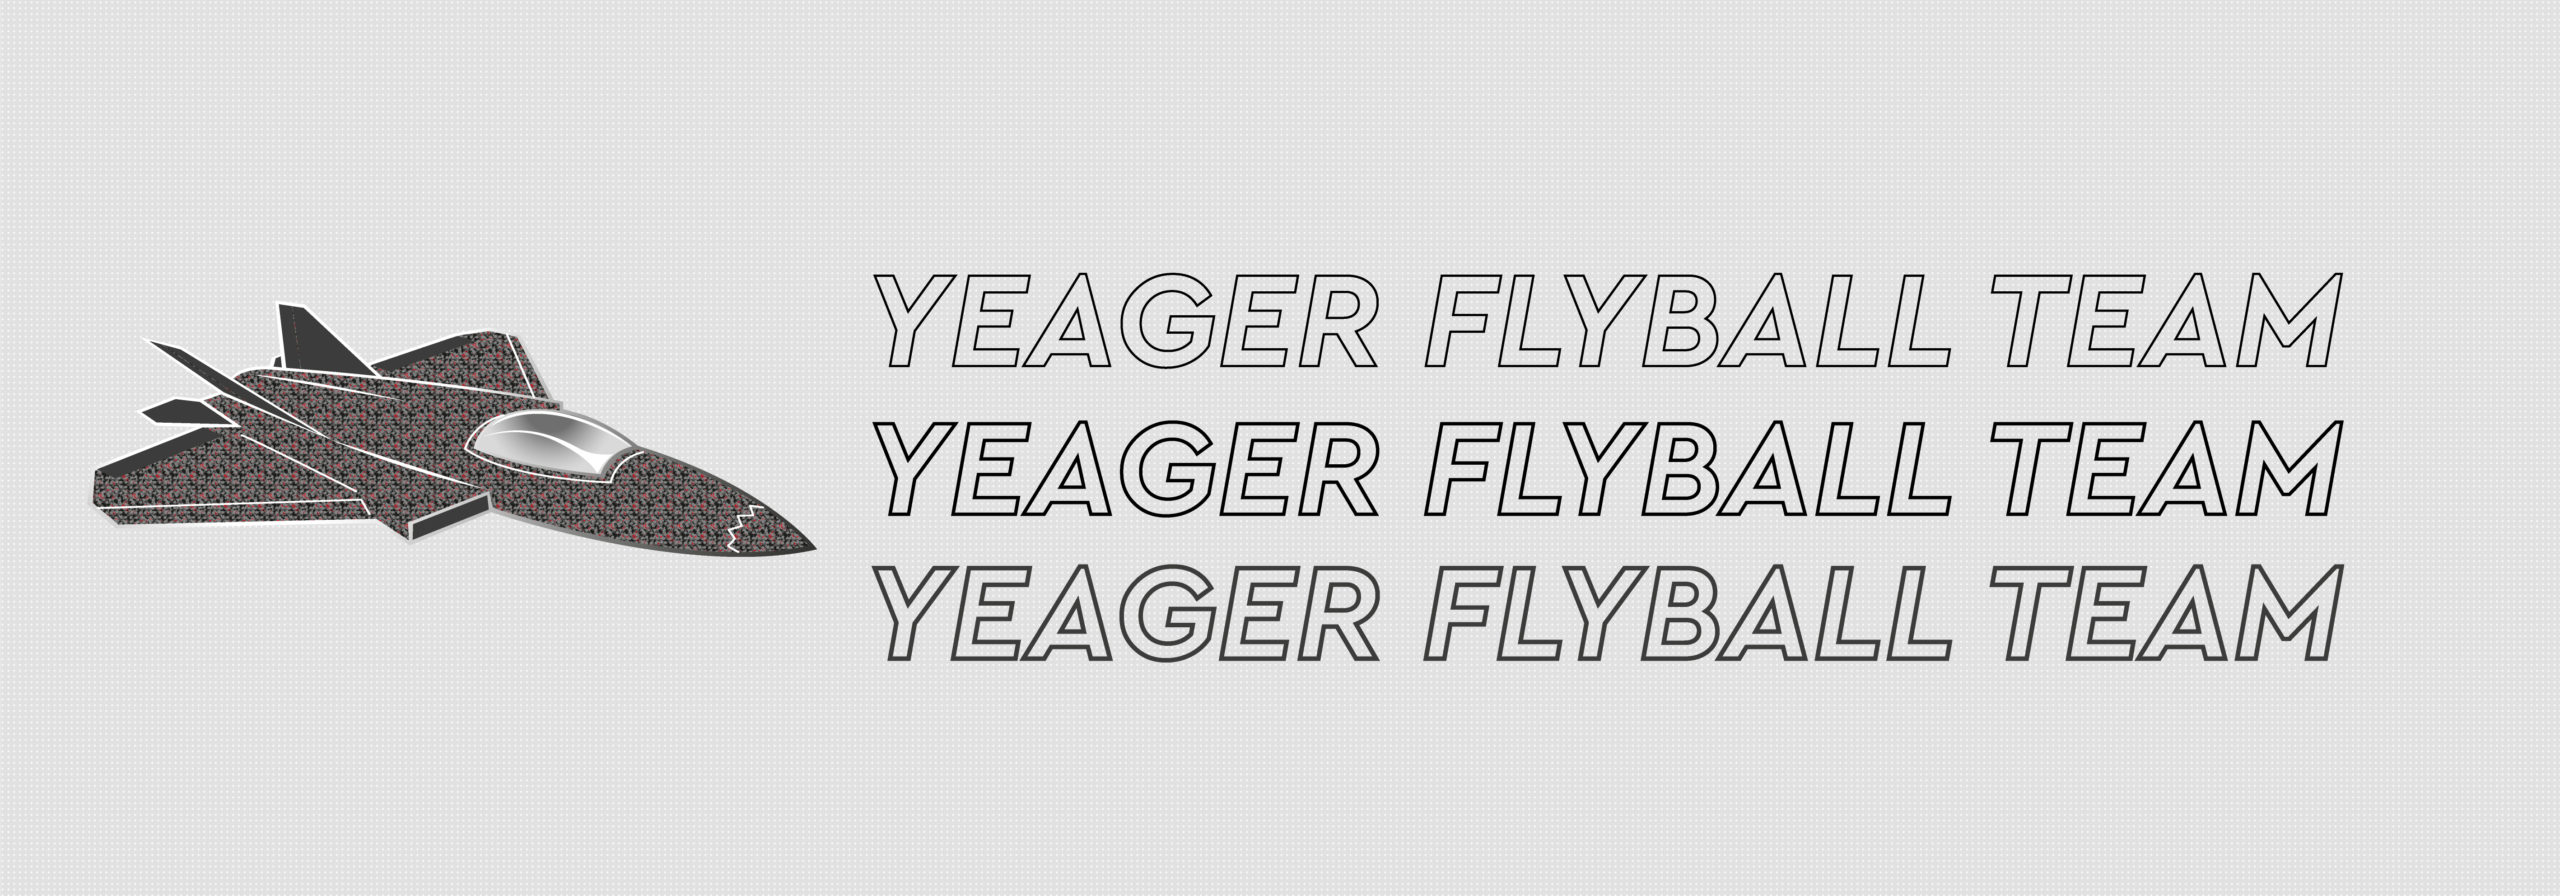 Yeager Flyball Team